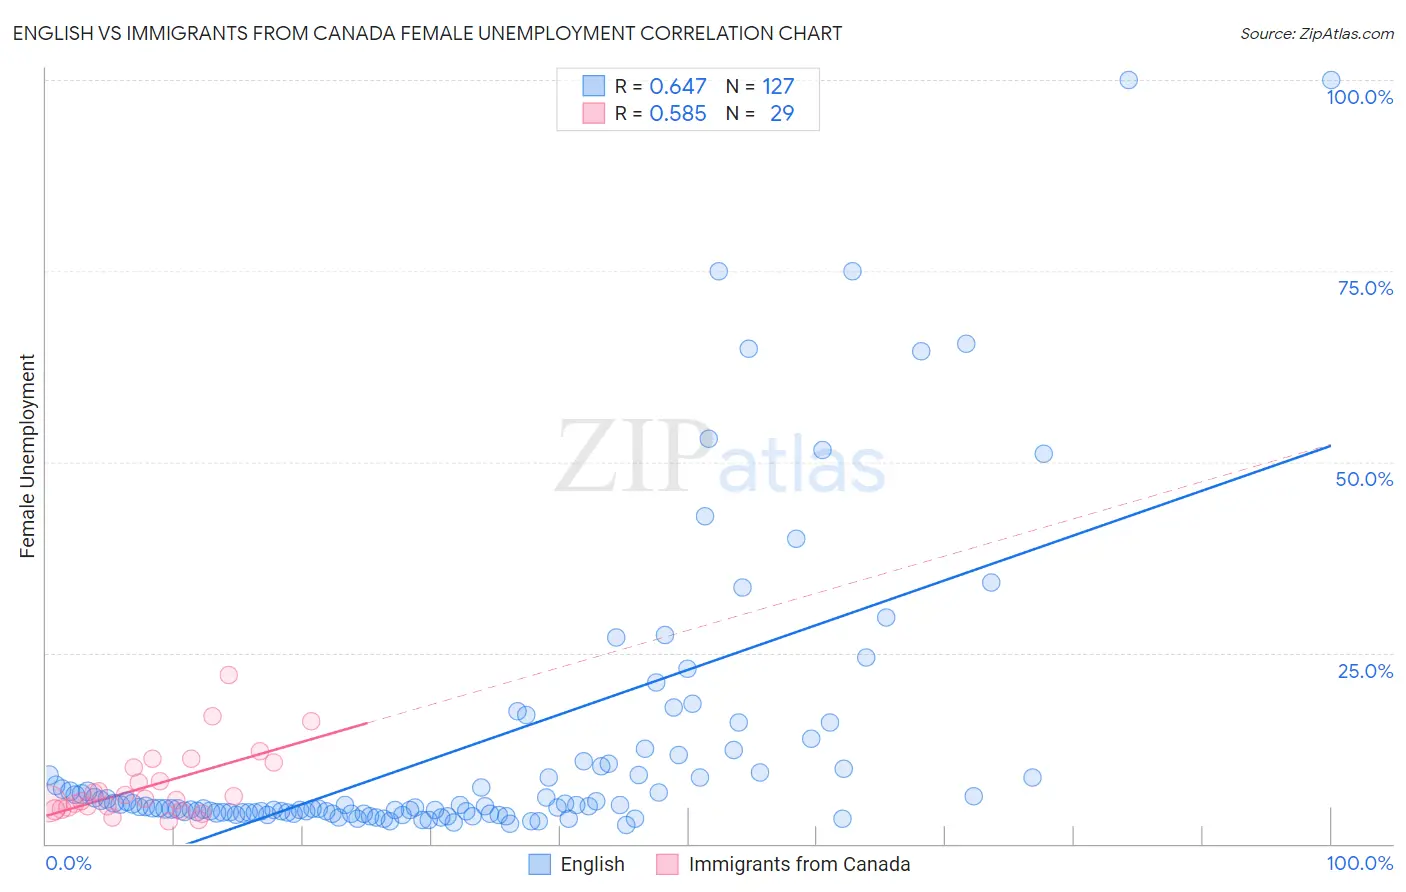 English vs Immigrants from Canada Female Unemployment